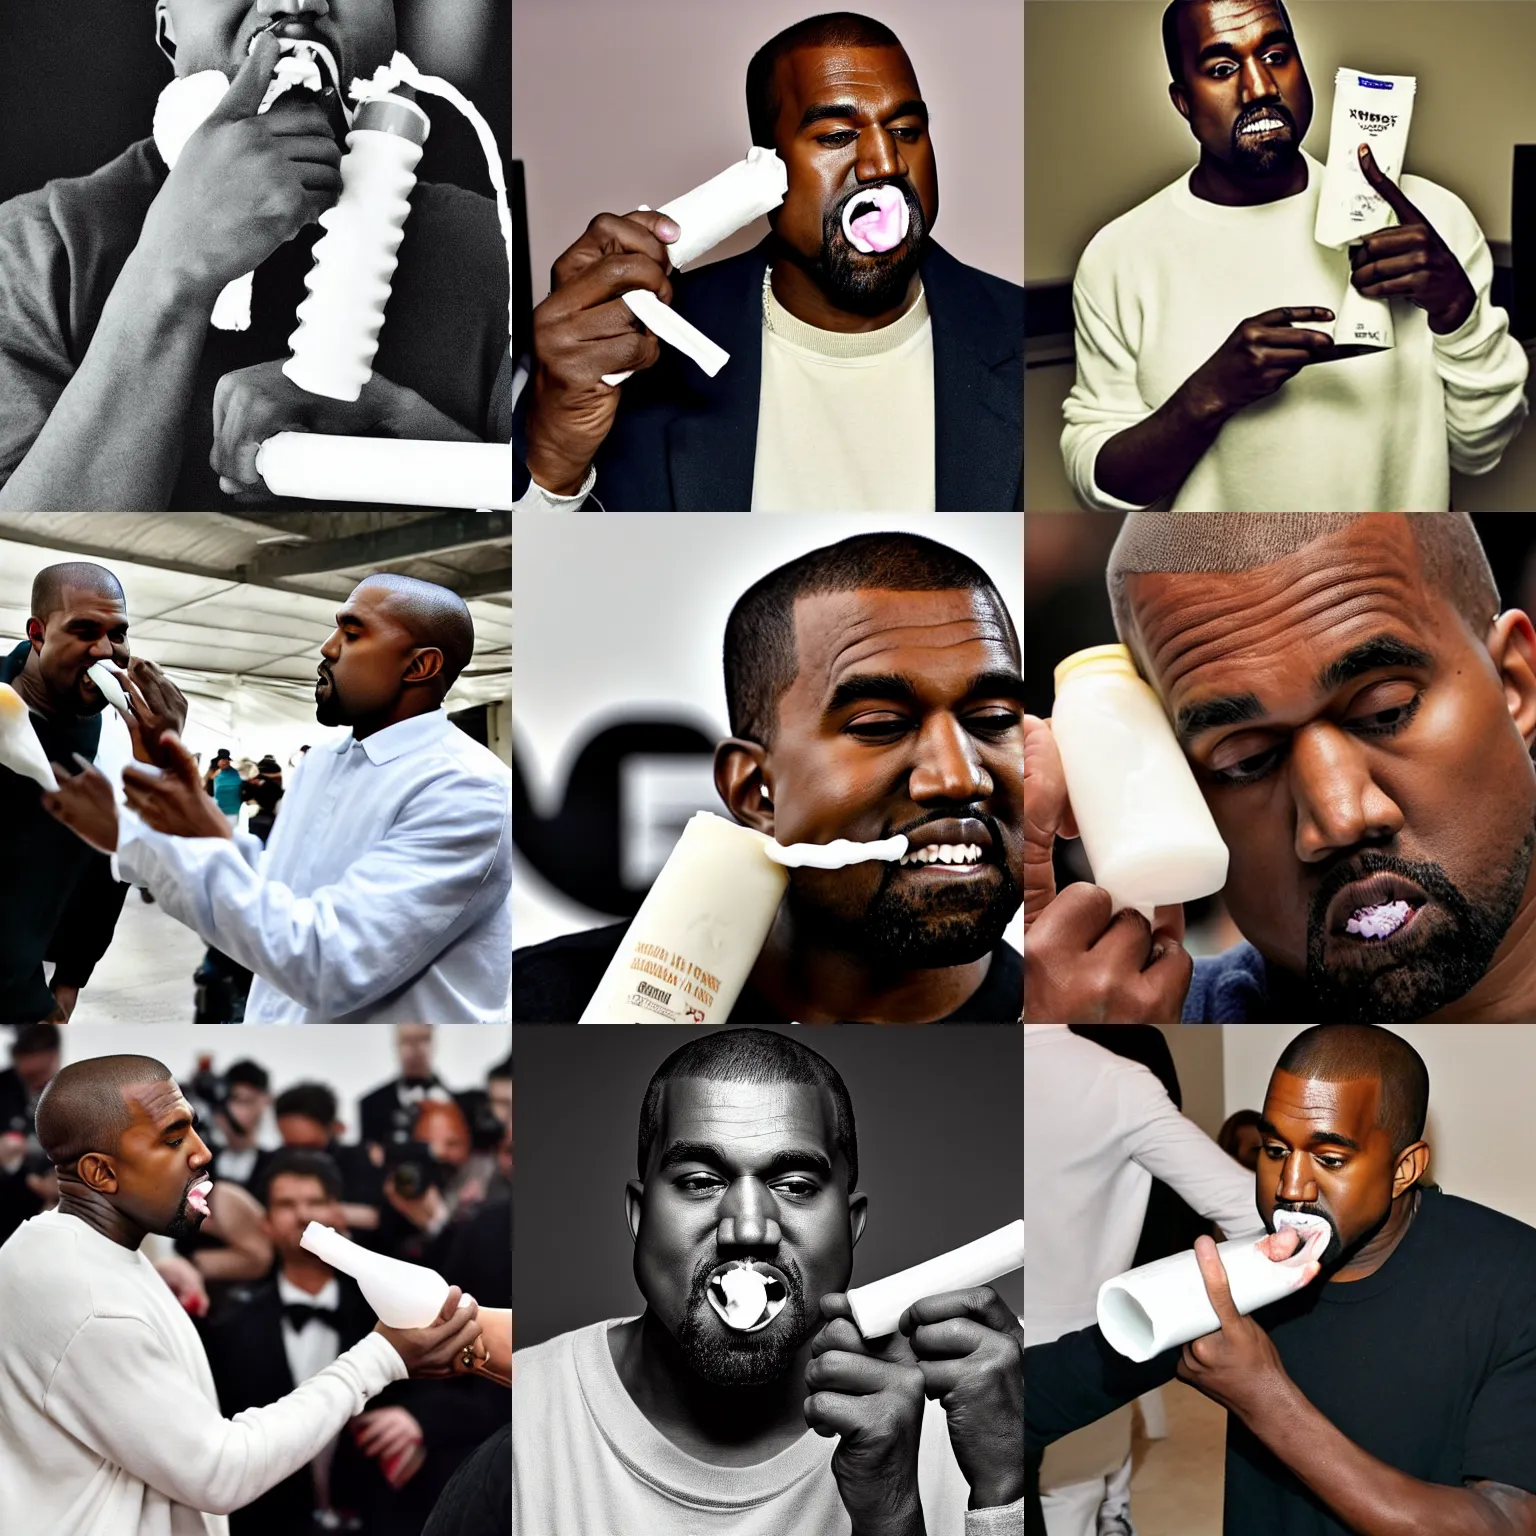 Prompt: kanye west squeezing a tube / roll of toothpaste into his mouth